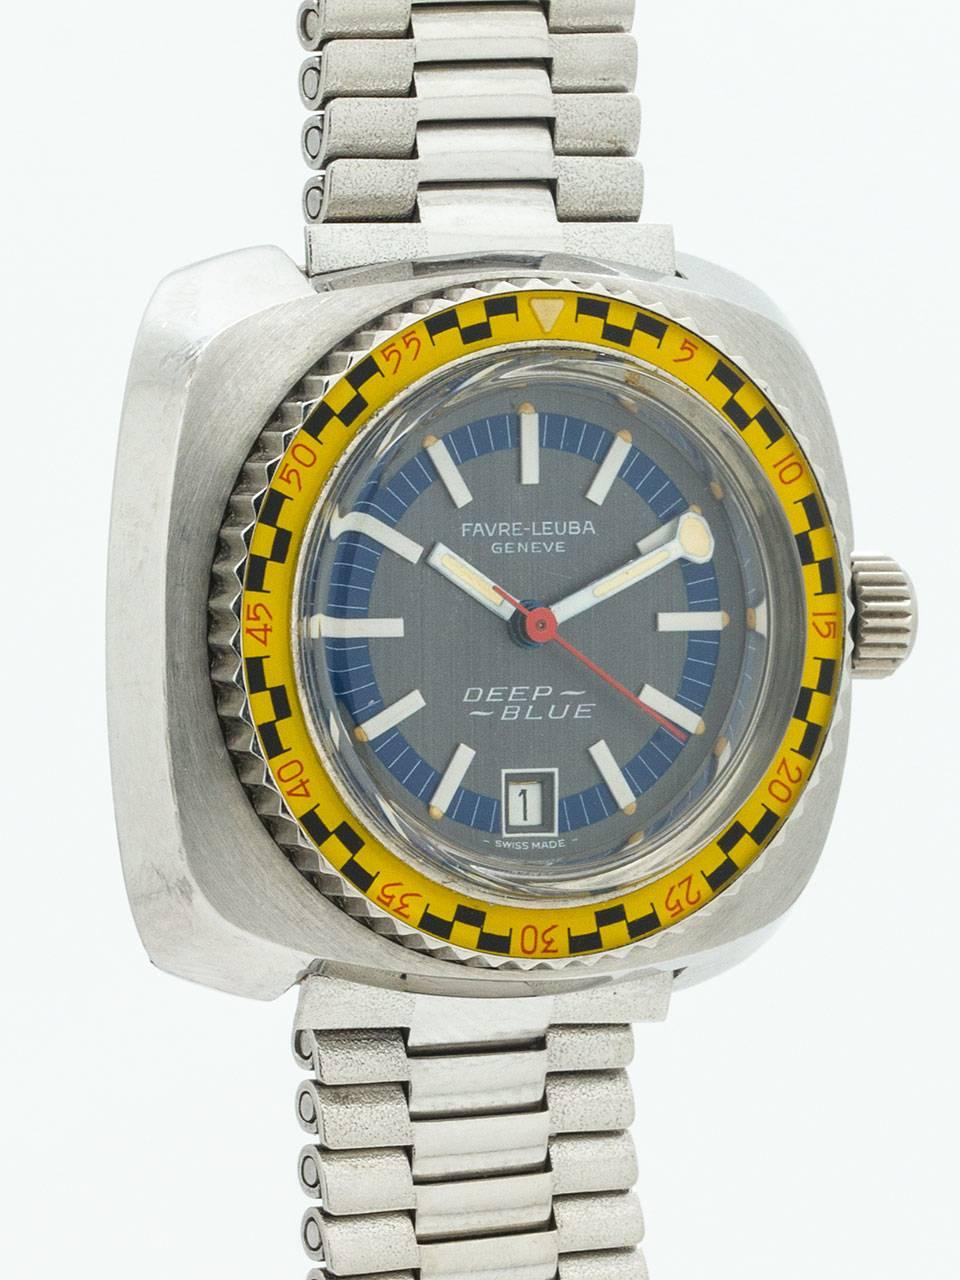 Great looking and design vintage Lady’s Favre Leuba Deep Blue Diver’s Model Wristwatch circa 1960s. Featuring 32 x 32 cushion shaped case with raised elapsed time brightly colored roulette style rotating bezel. Dramatic 2 tone gray dial with large